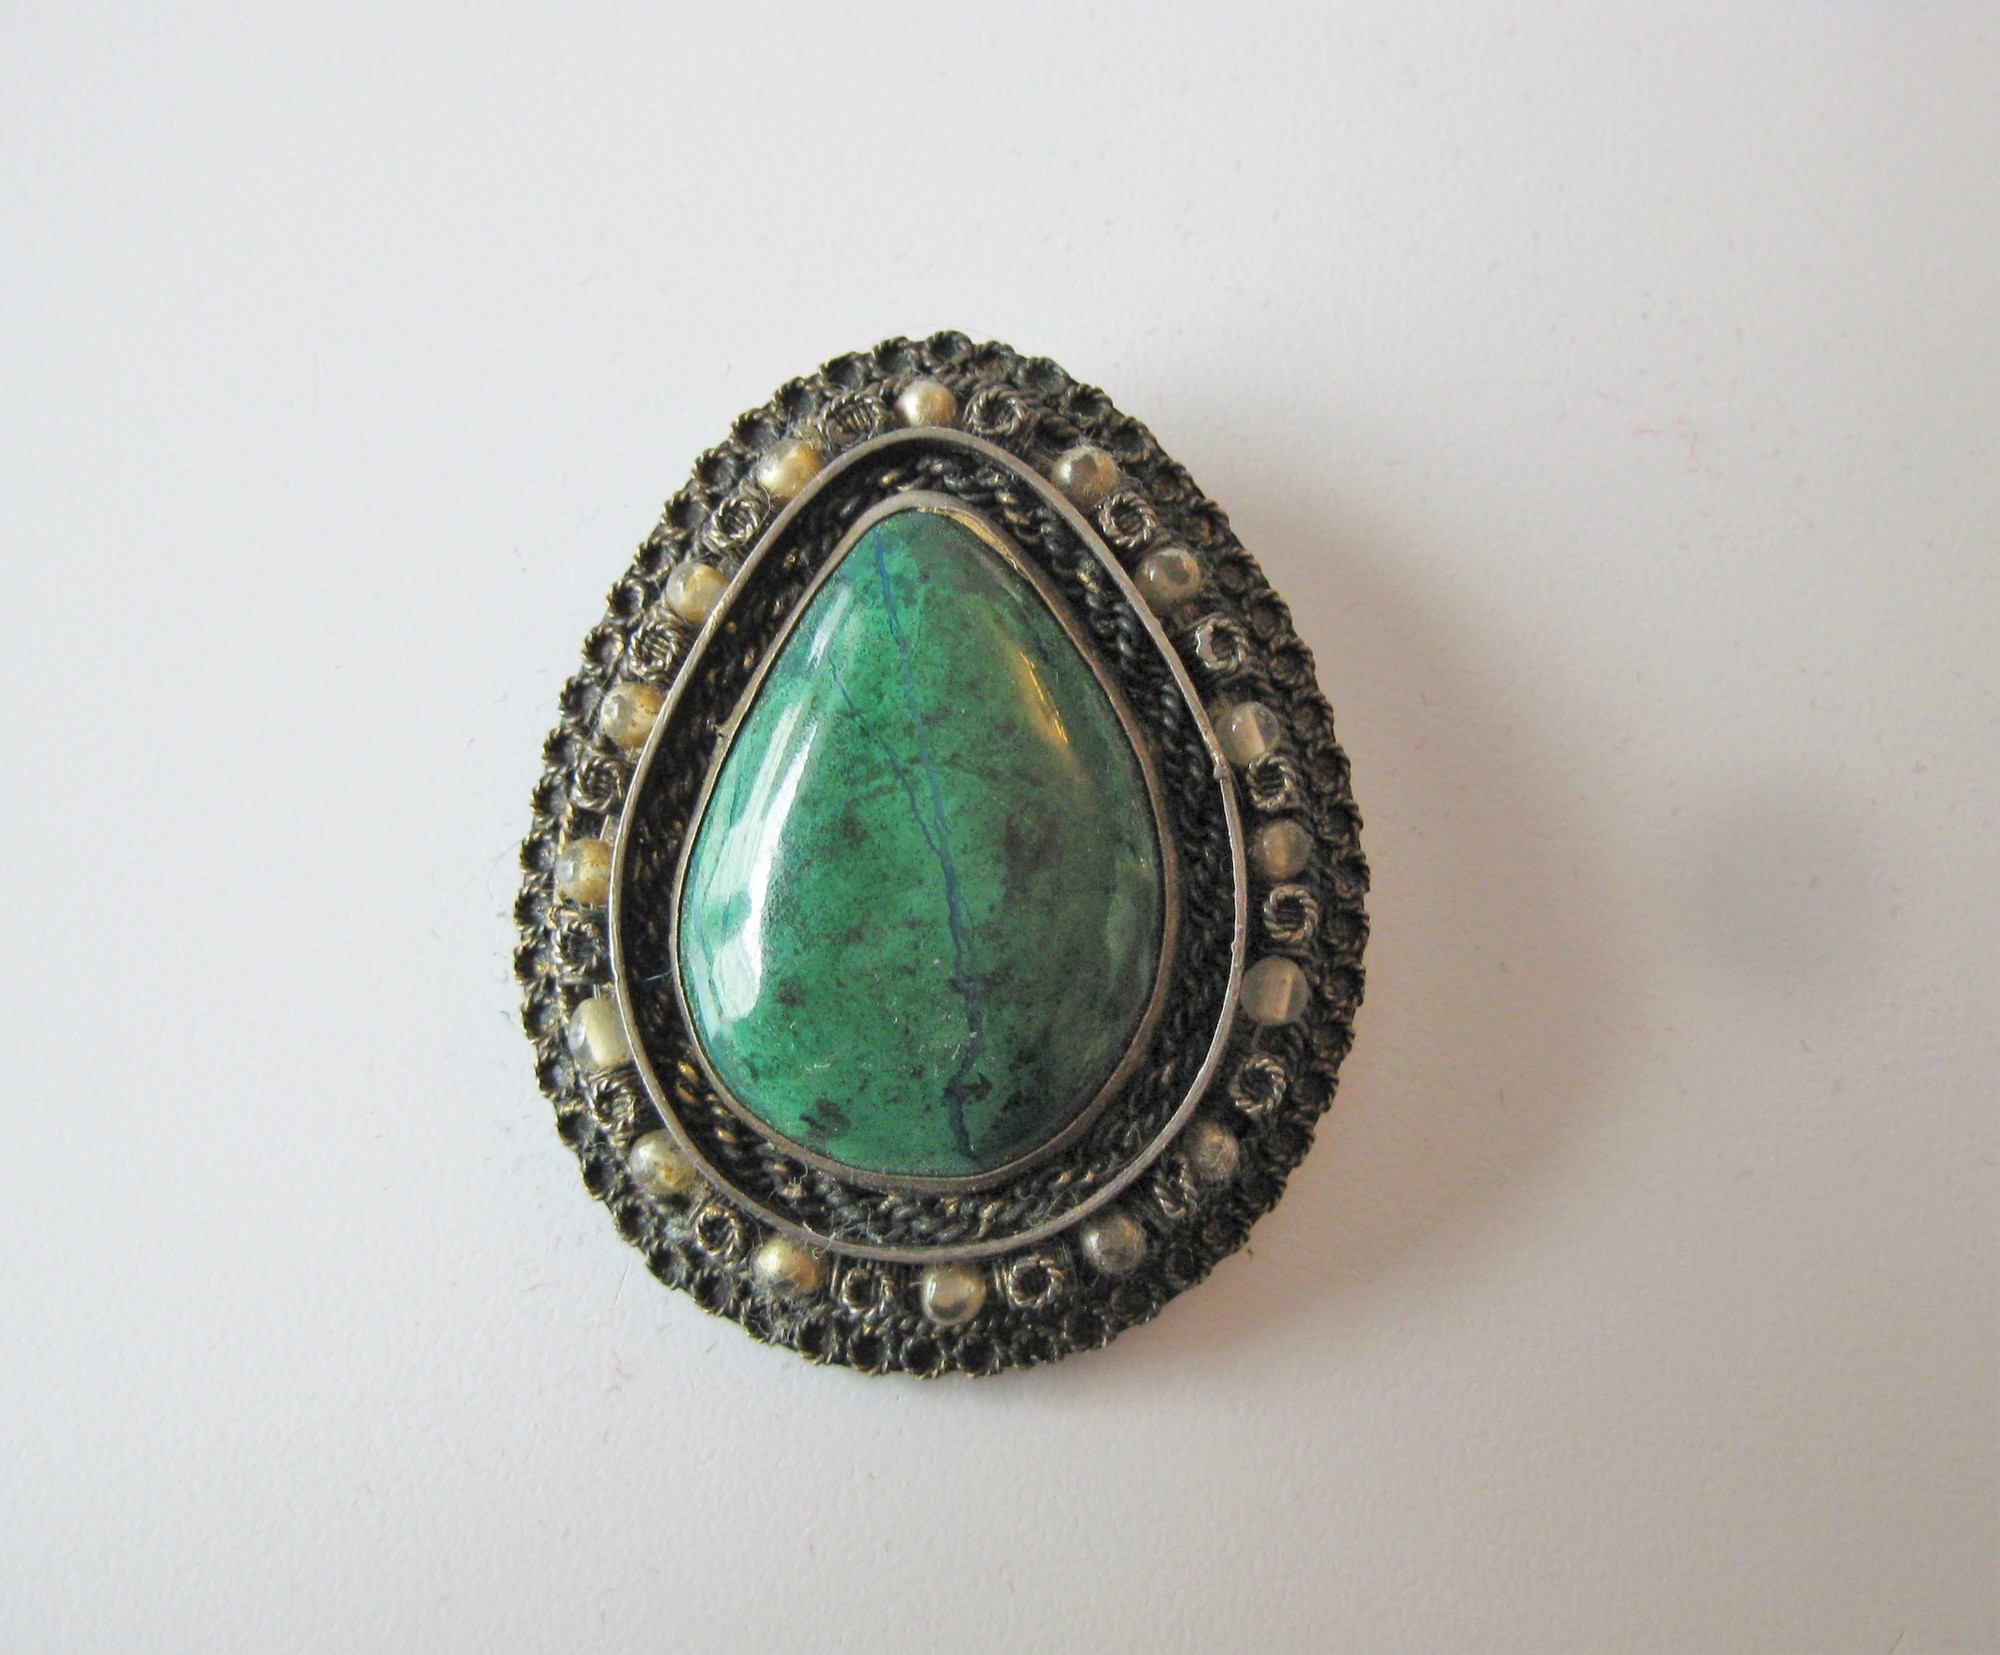 Stunning Old brooch in a silver setting with a polished green stone
It has both a pin and a bale on the back so it can be used as a pendant or a brooch
The stone has a thin almost blue vein running top to bottom
I don't know what the stone is but it could be aventurine , green marble or perhaps malachite
I believe it was made in Israel and is also sterling (based on another almost identical brooch I found online) but there are no markings or hallmarks on the pin so be aware.

The stone is a polished cabochon in perfect condition, the metal setting is in perfect working conditions but showing signs of age as you can see.

1.5 wide x 2in tall

Thanks for looking!
#14826